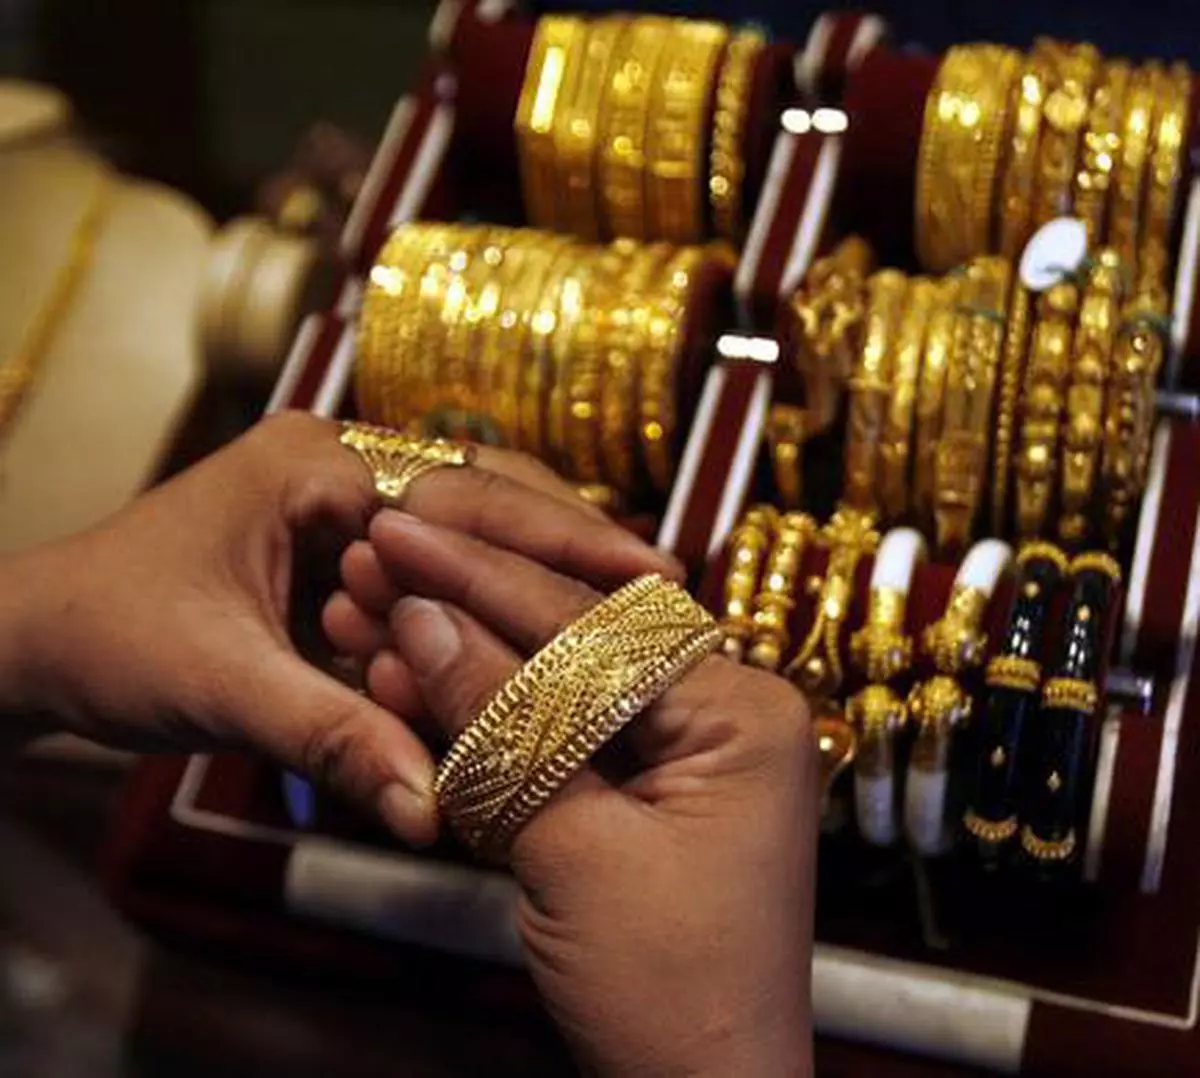 Plain gold jewellery exports were the immediate beneficiary of the India-UAE CEPA